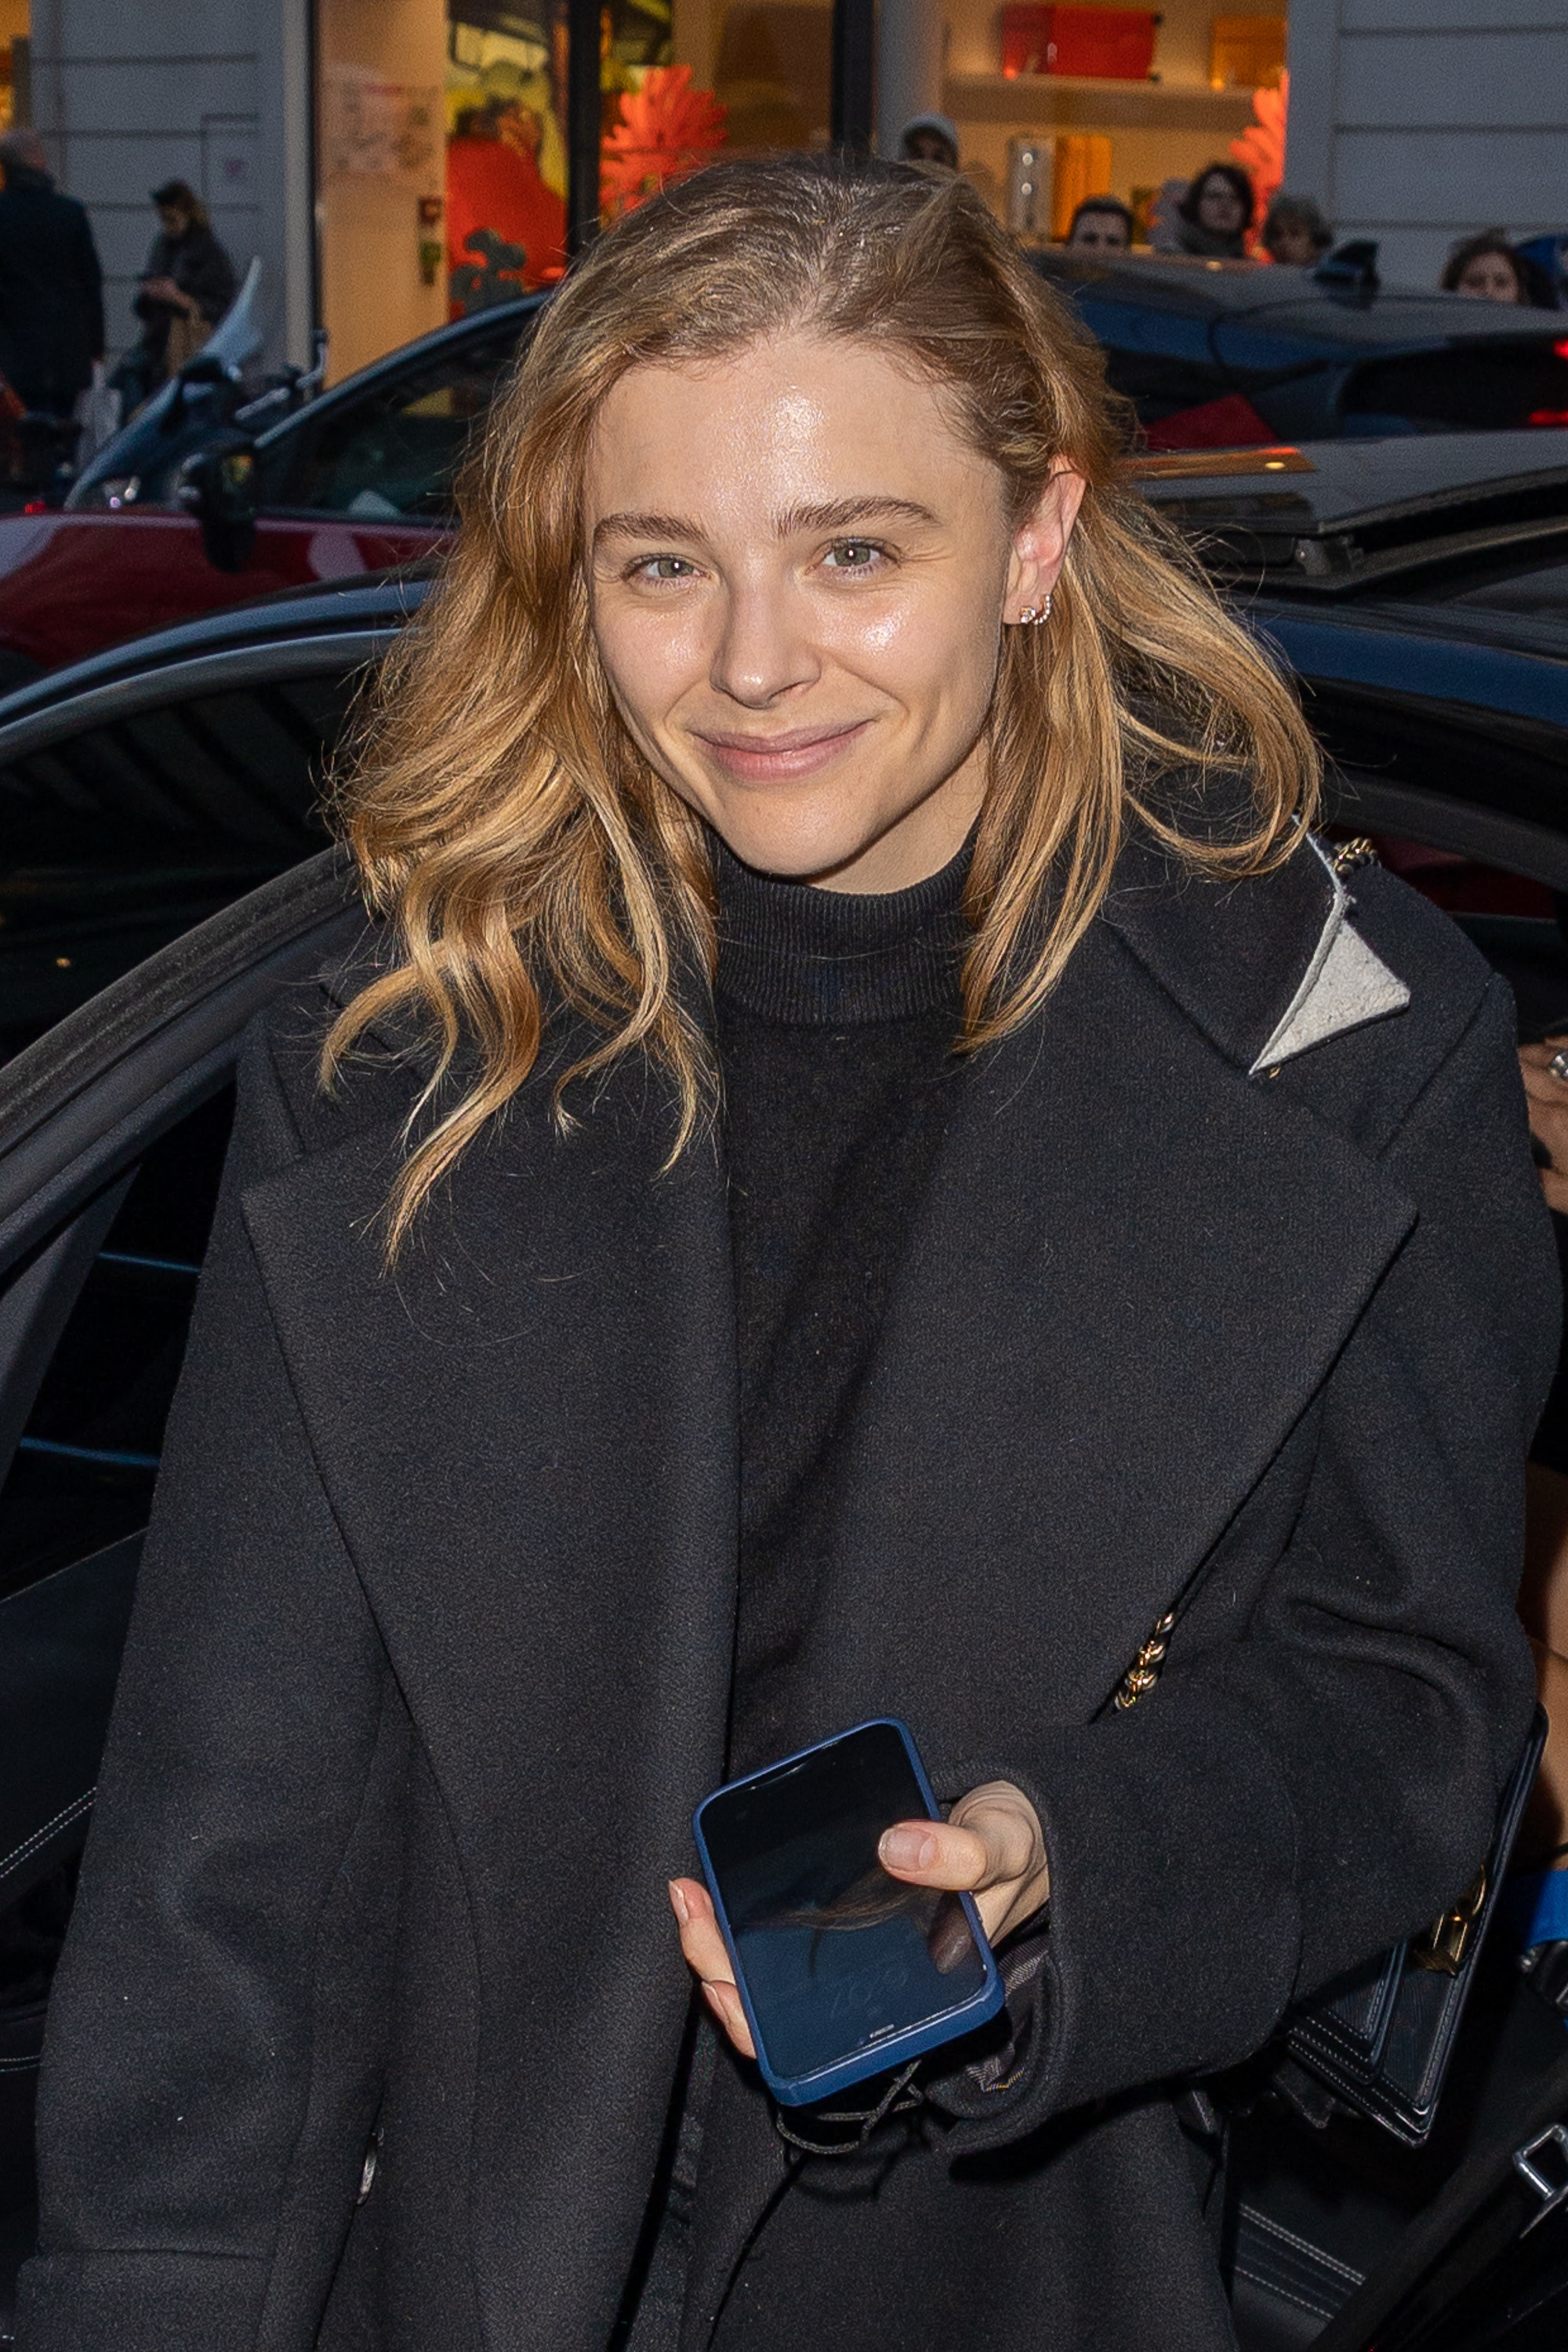 Chloe Moretz Reveals She Suffered From Body Dysmorphia After Viral